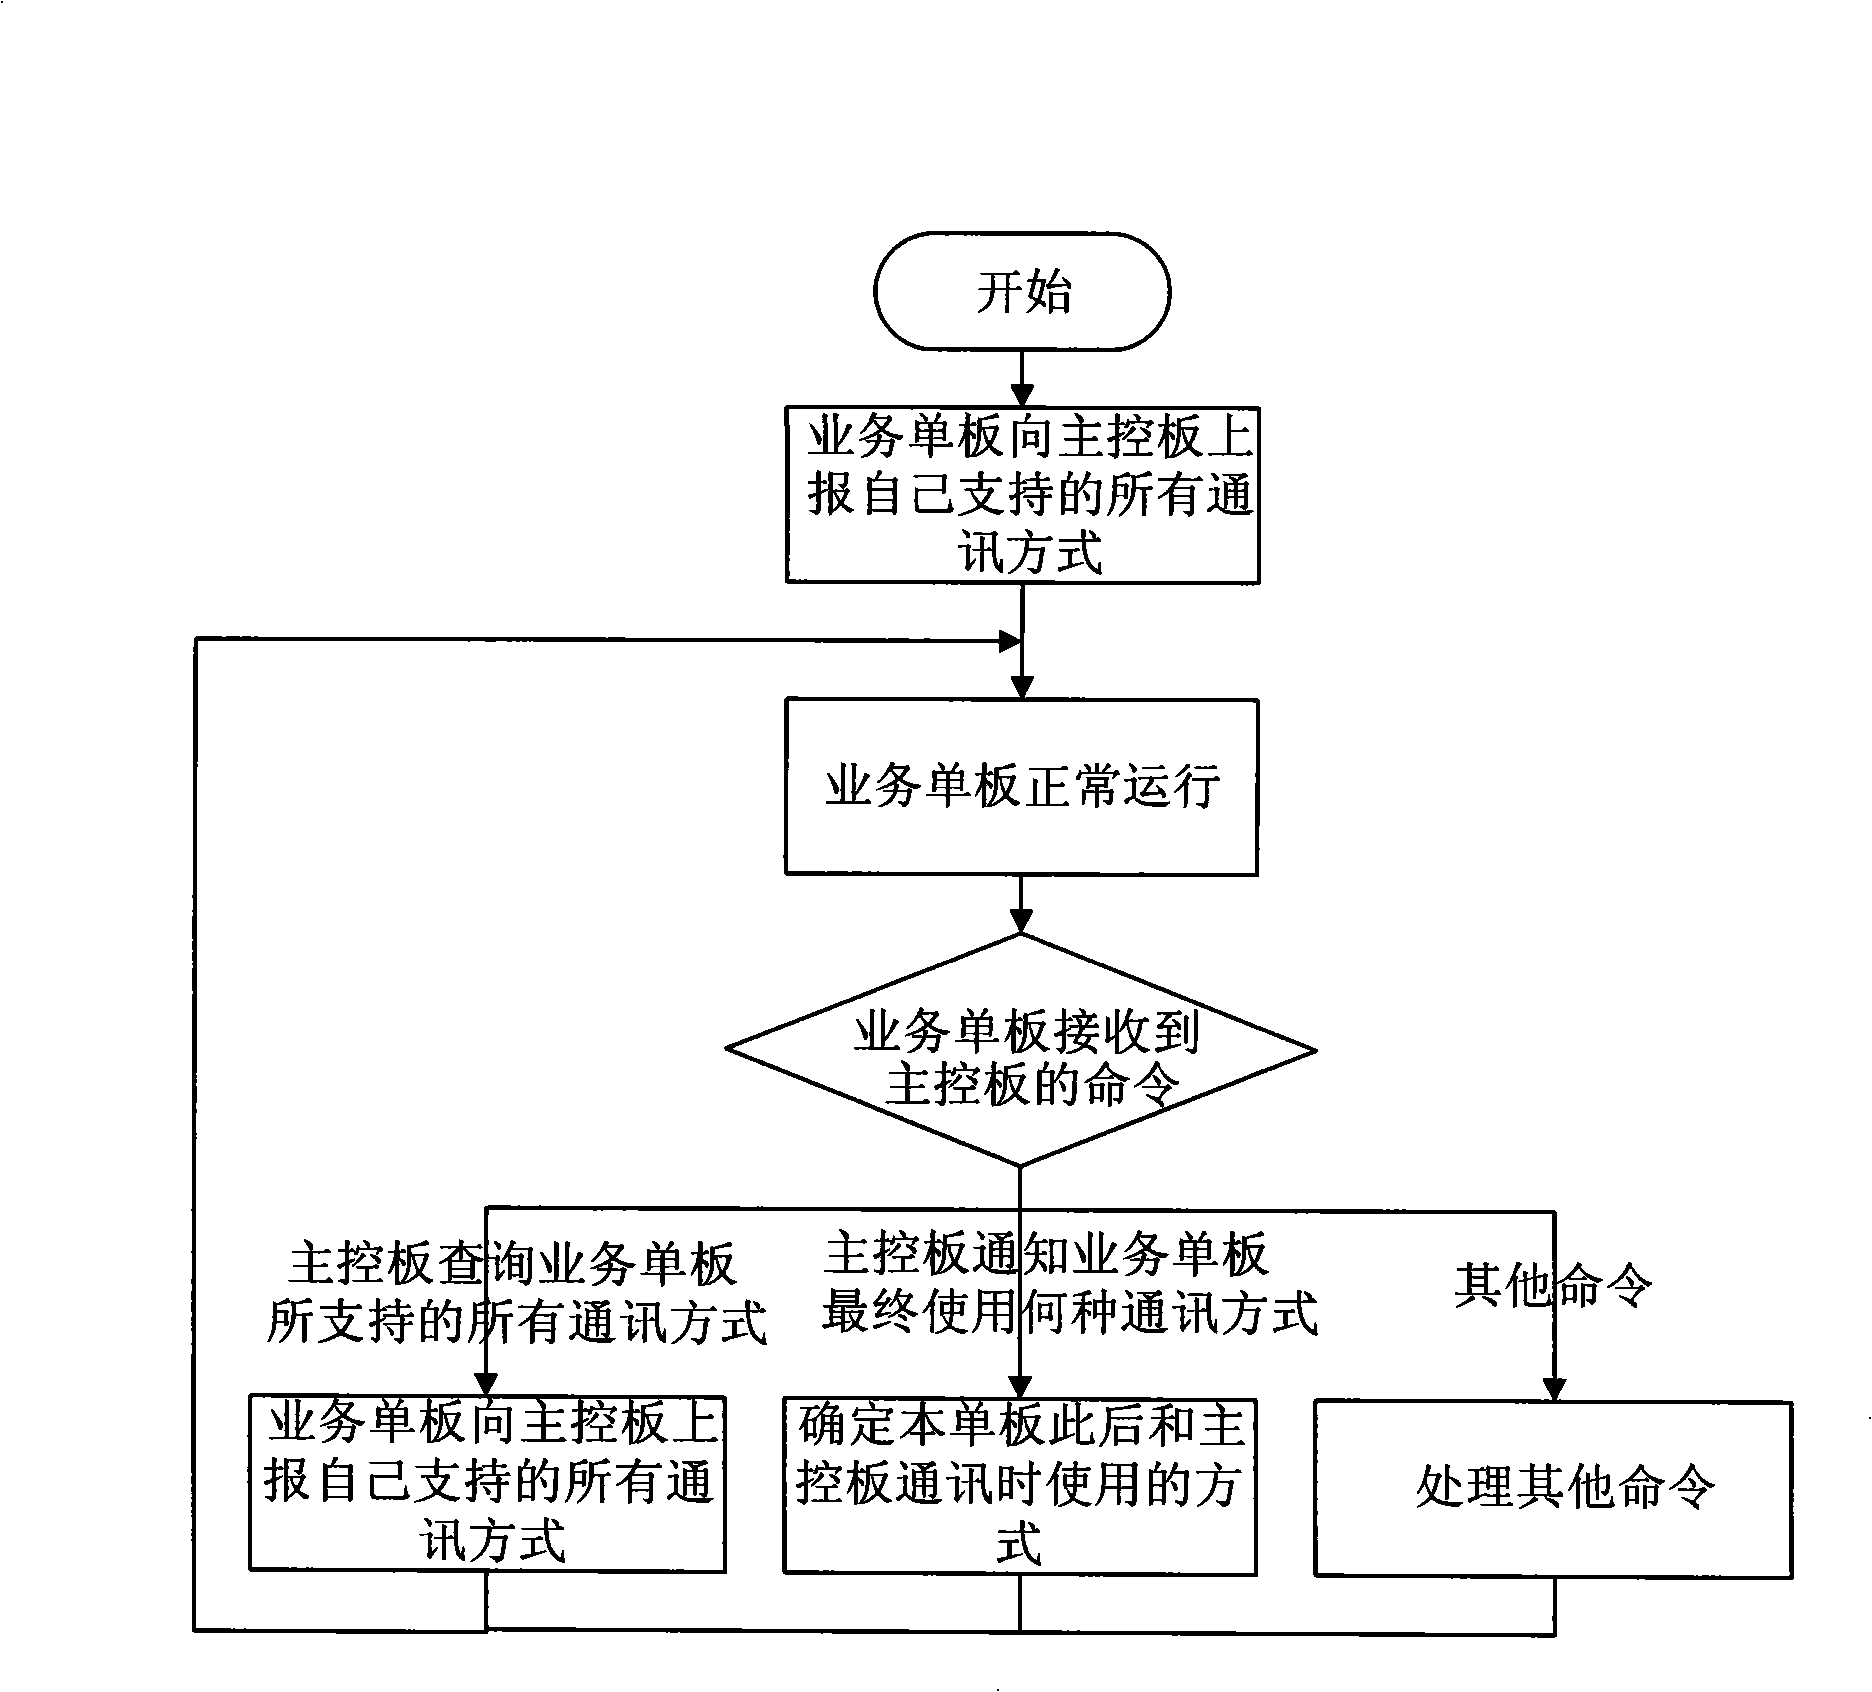 Communication method and system between photo-timing transmission equipment master control board and business single plate